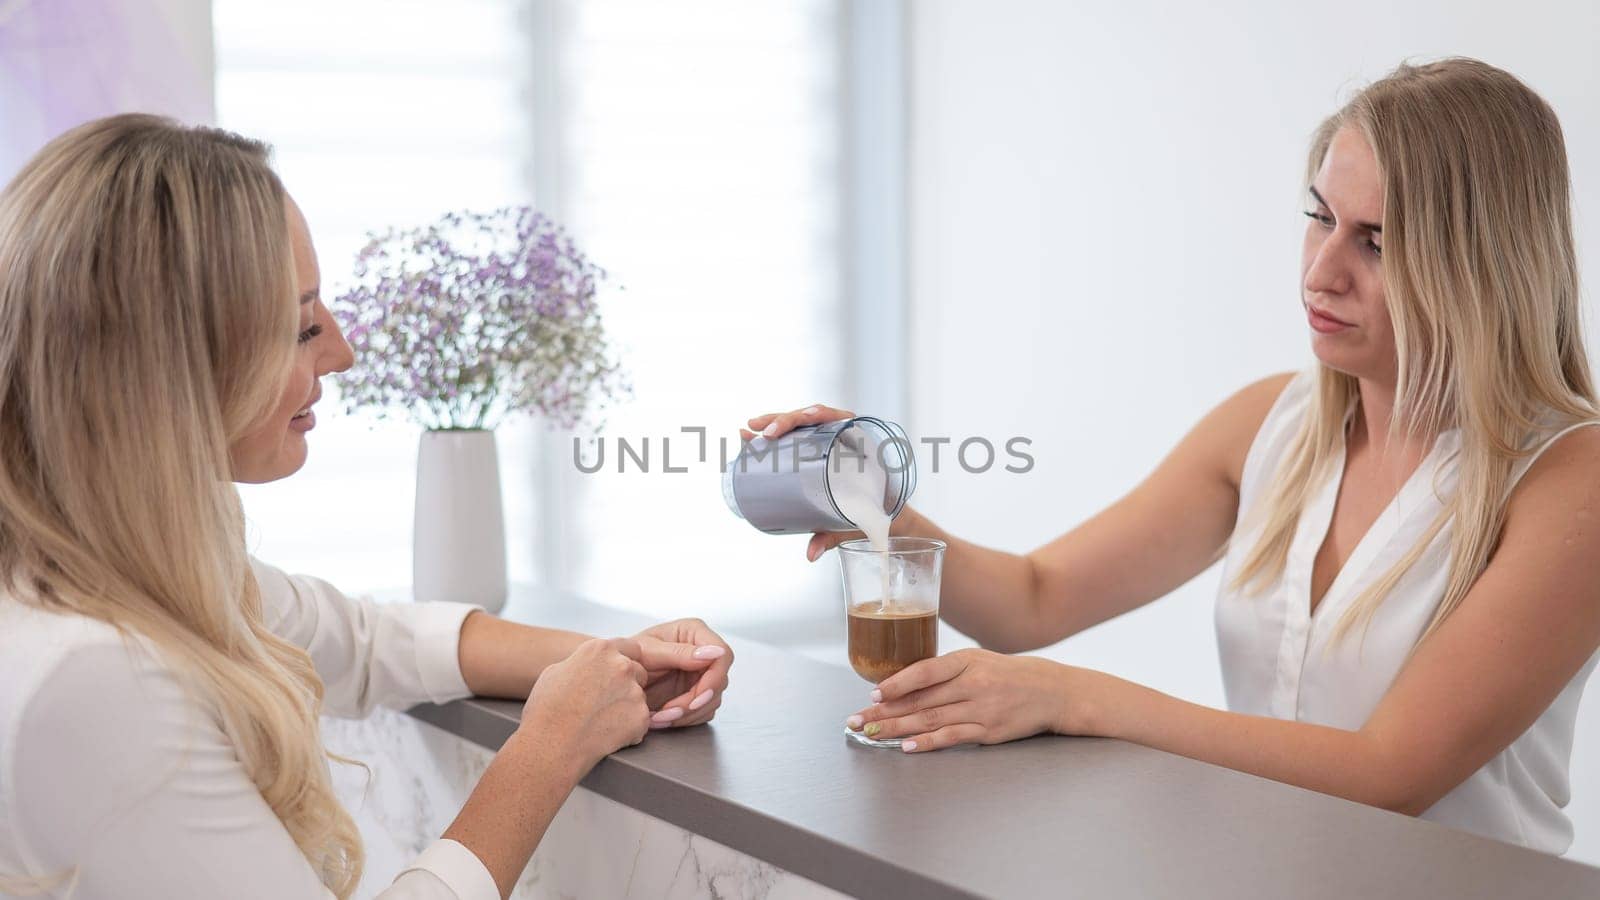 Receptionist in a beauty salon prepares coffee for a client